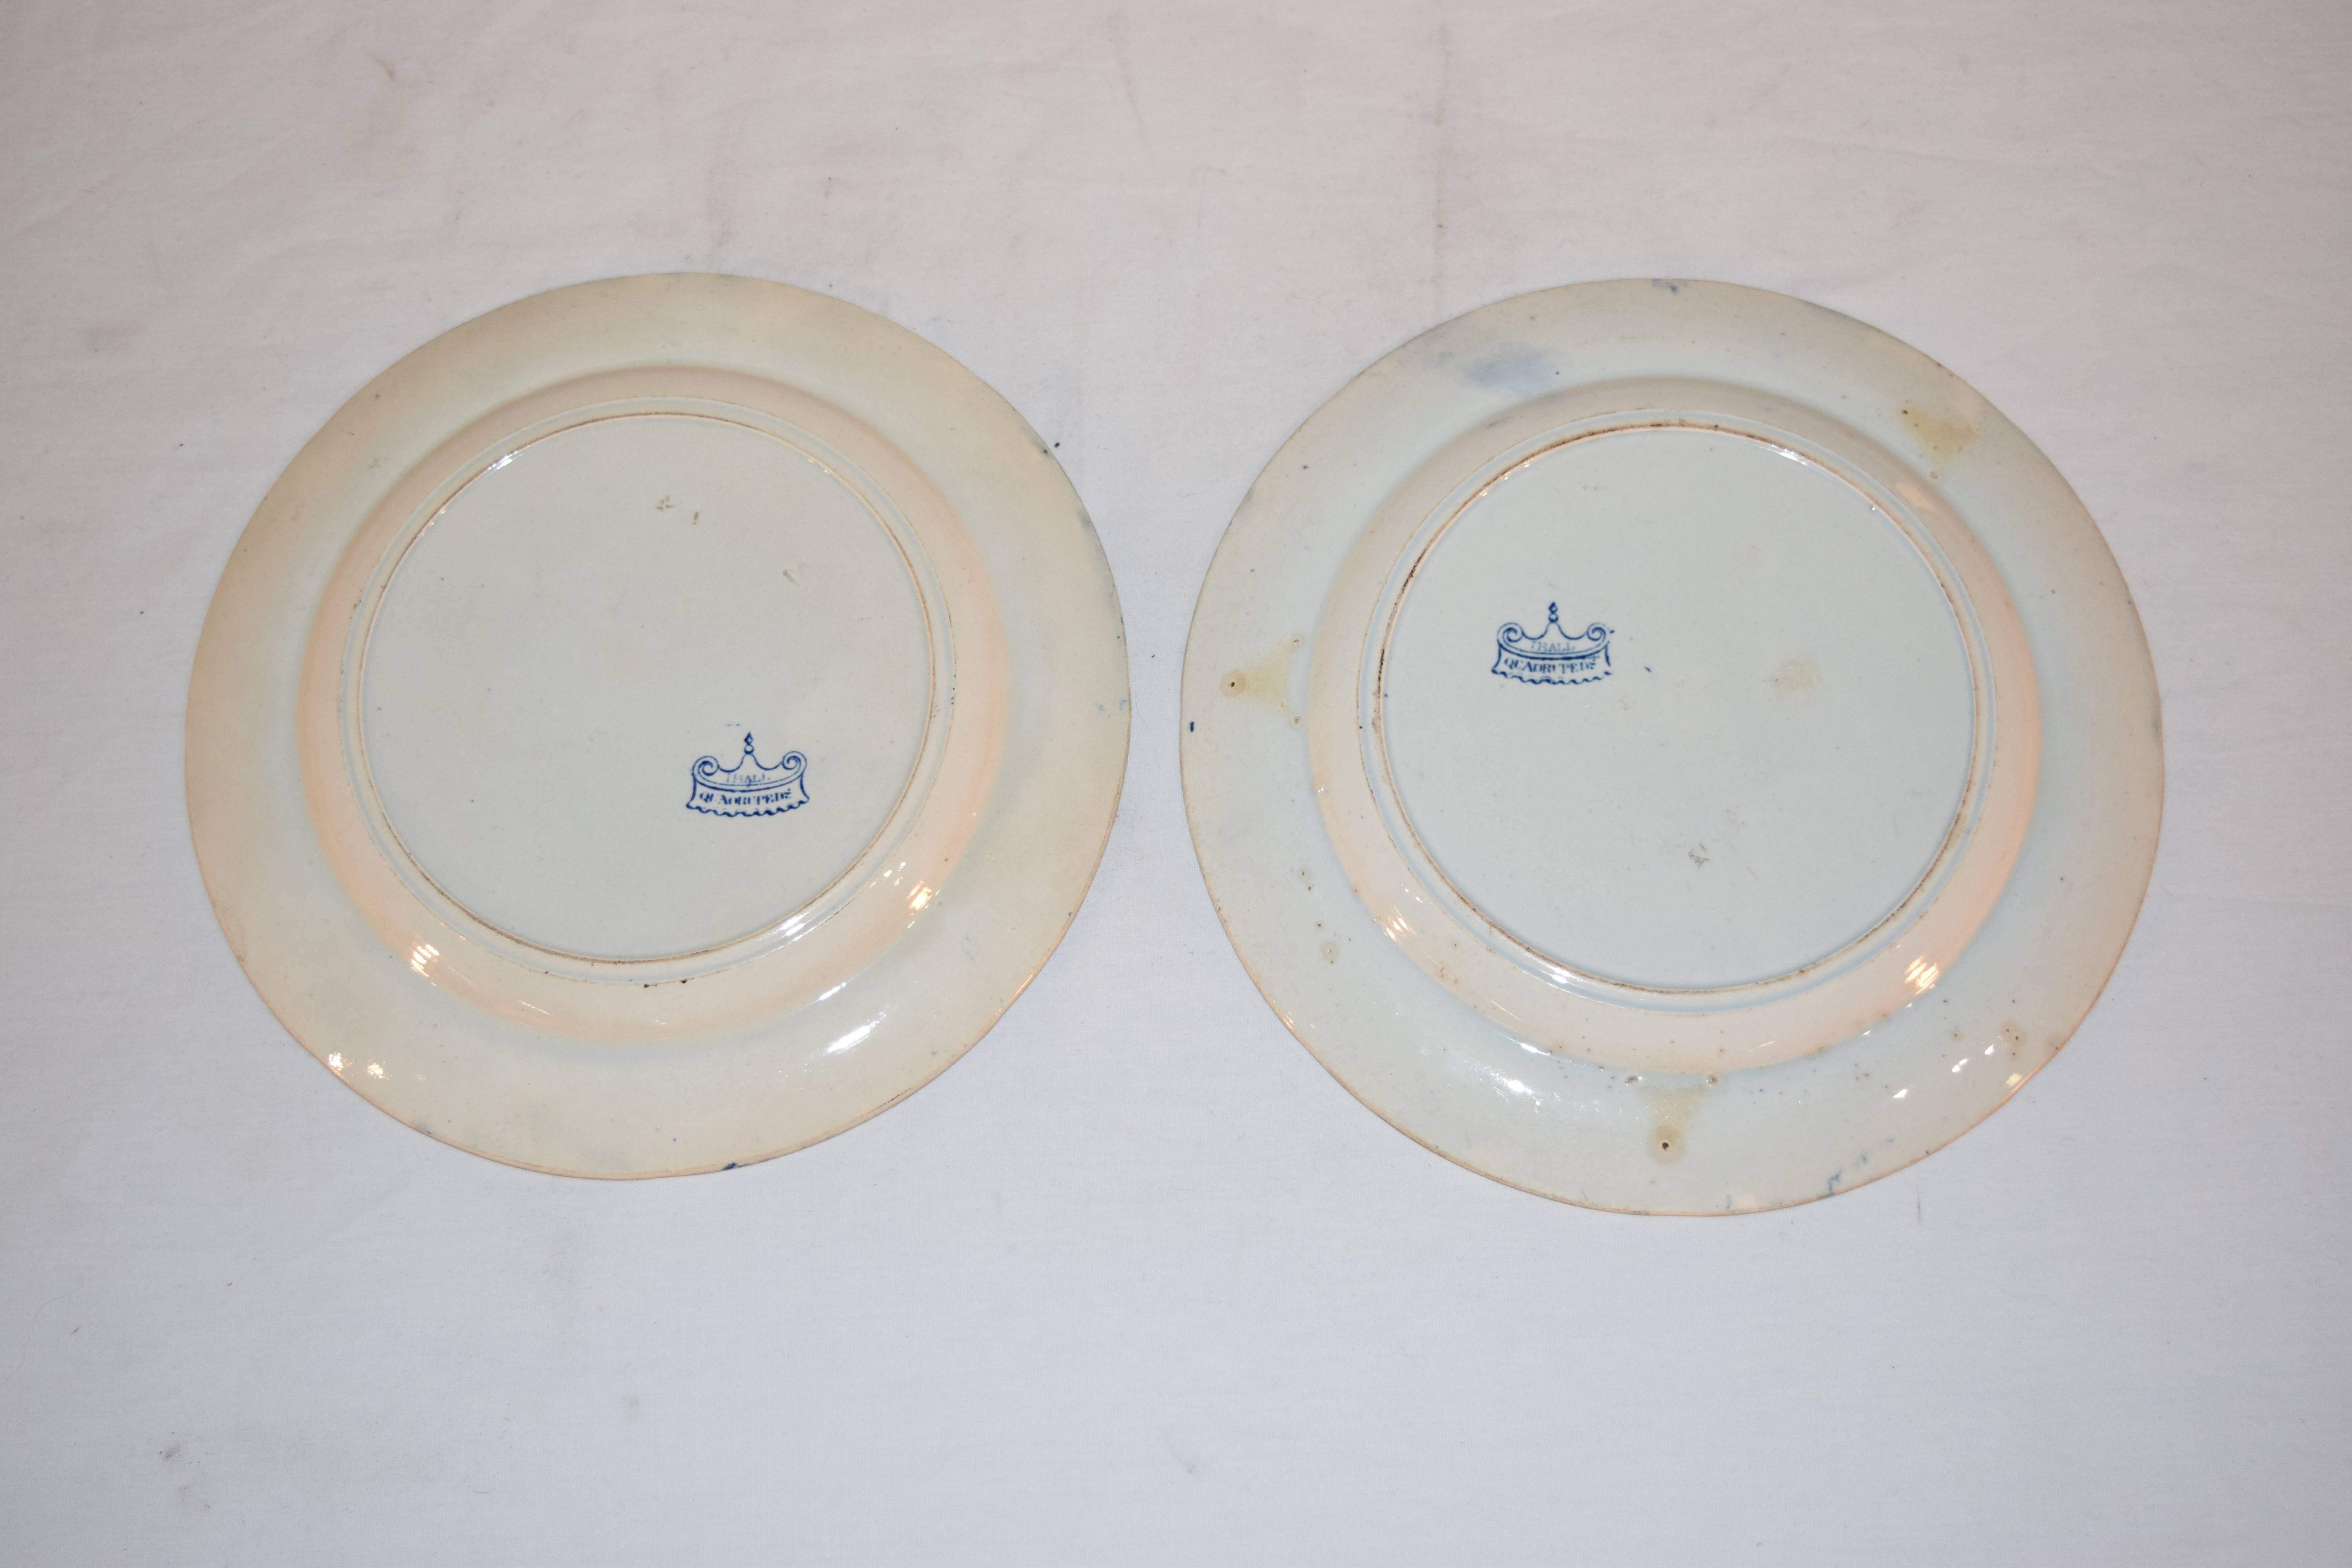 19th century dinner plates in the Quadruped series, John Hall & Sons, Burslem Staffordshire, circa 1825-1830. The central medallion has a scene of a lion and a cow.